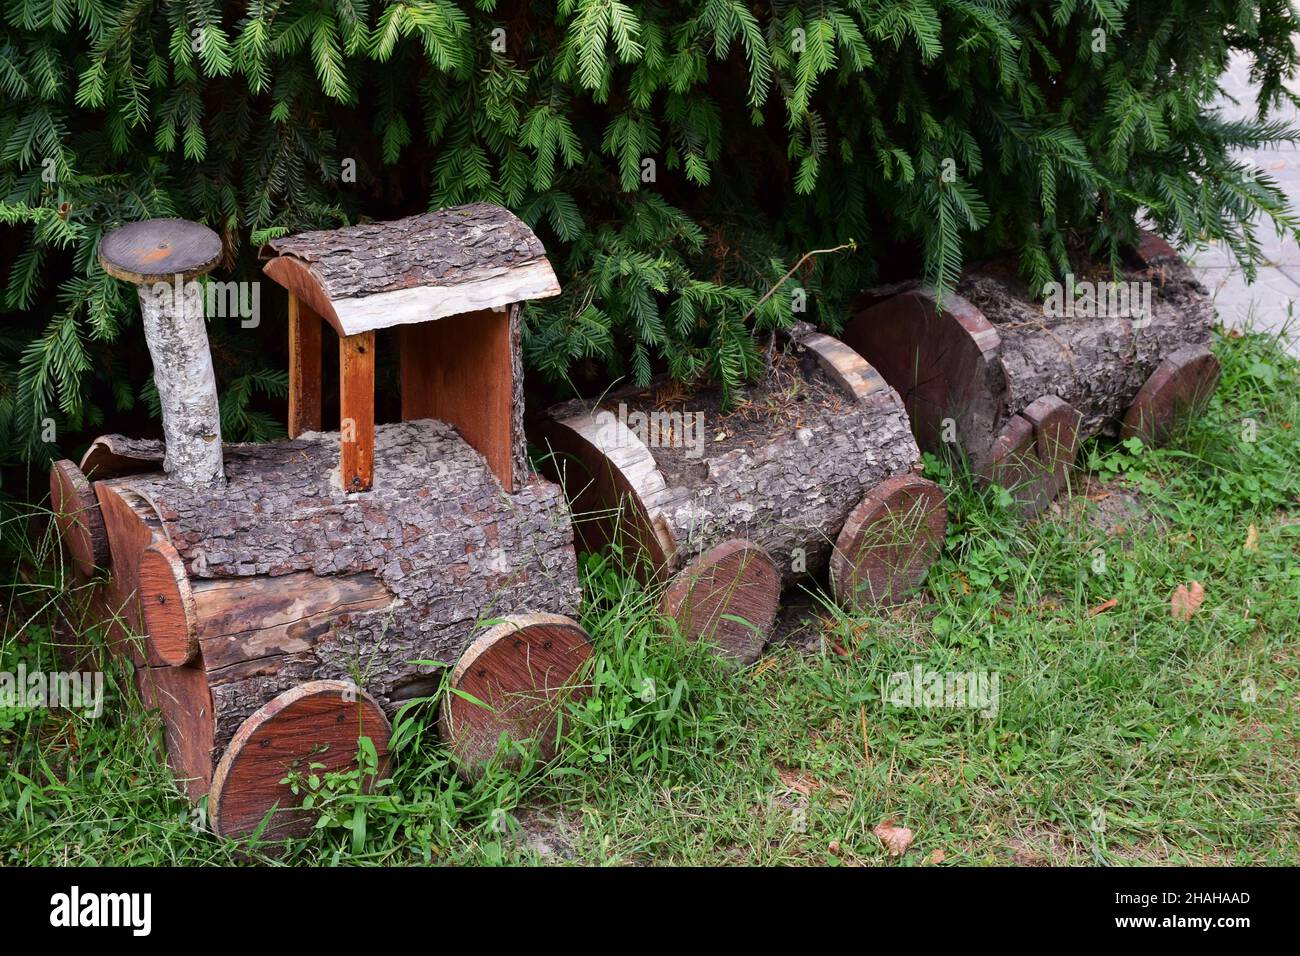 A small decorative locomotive and two carriages made of logs stand under a spruce for fun for children and tourists Stock Photo